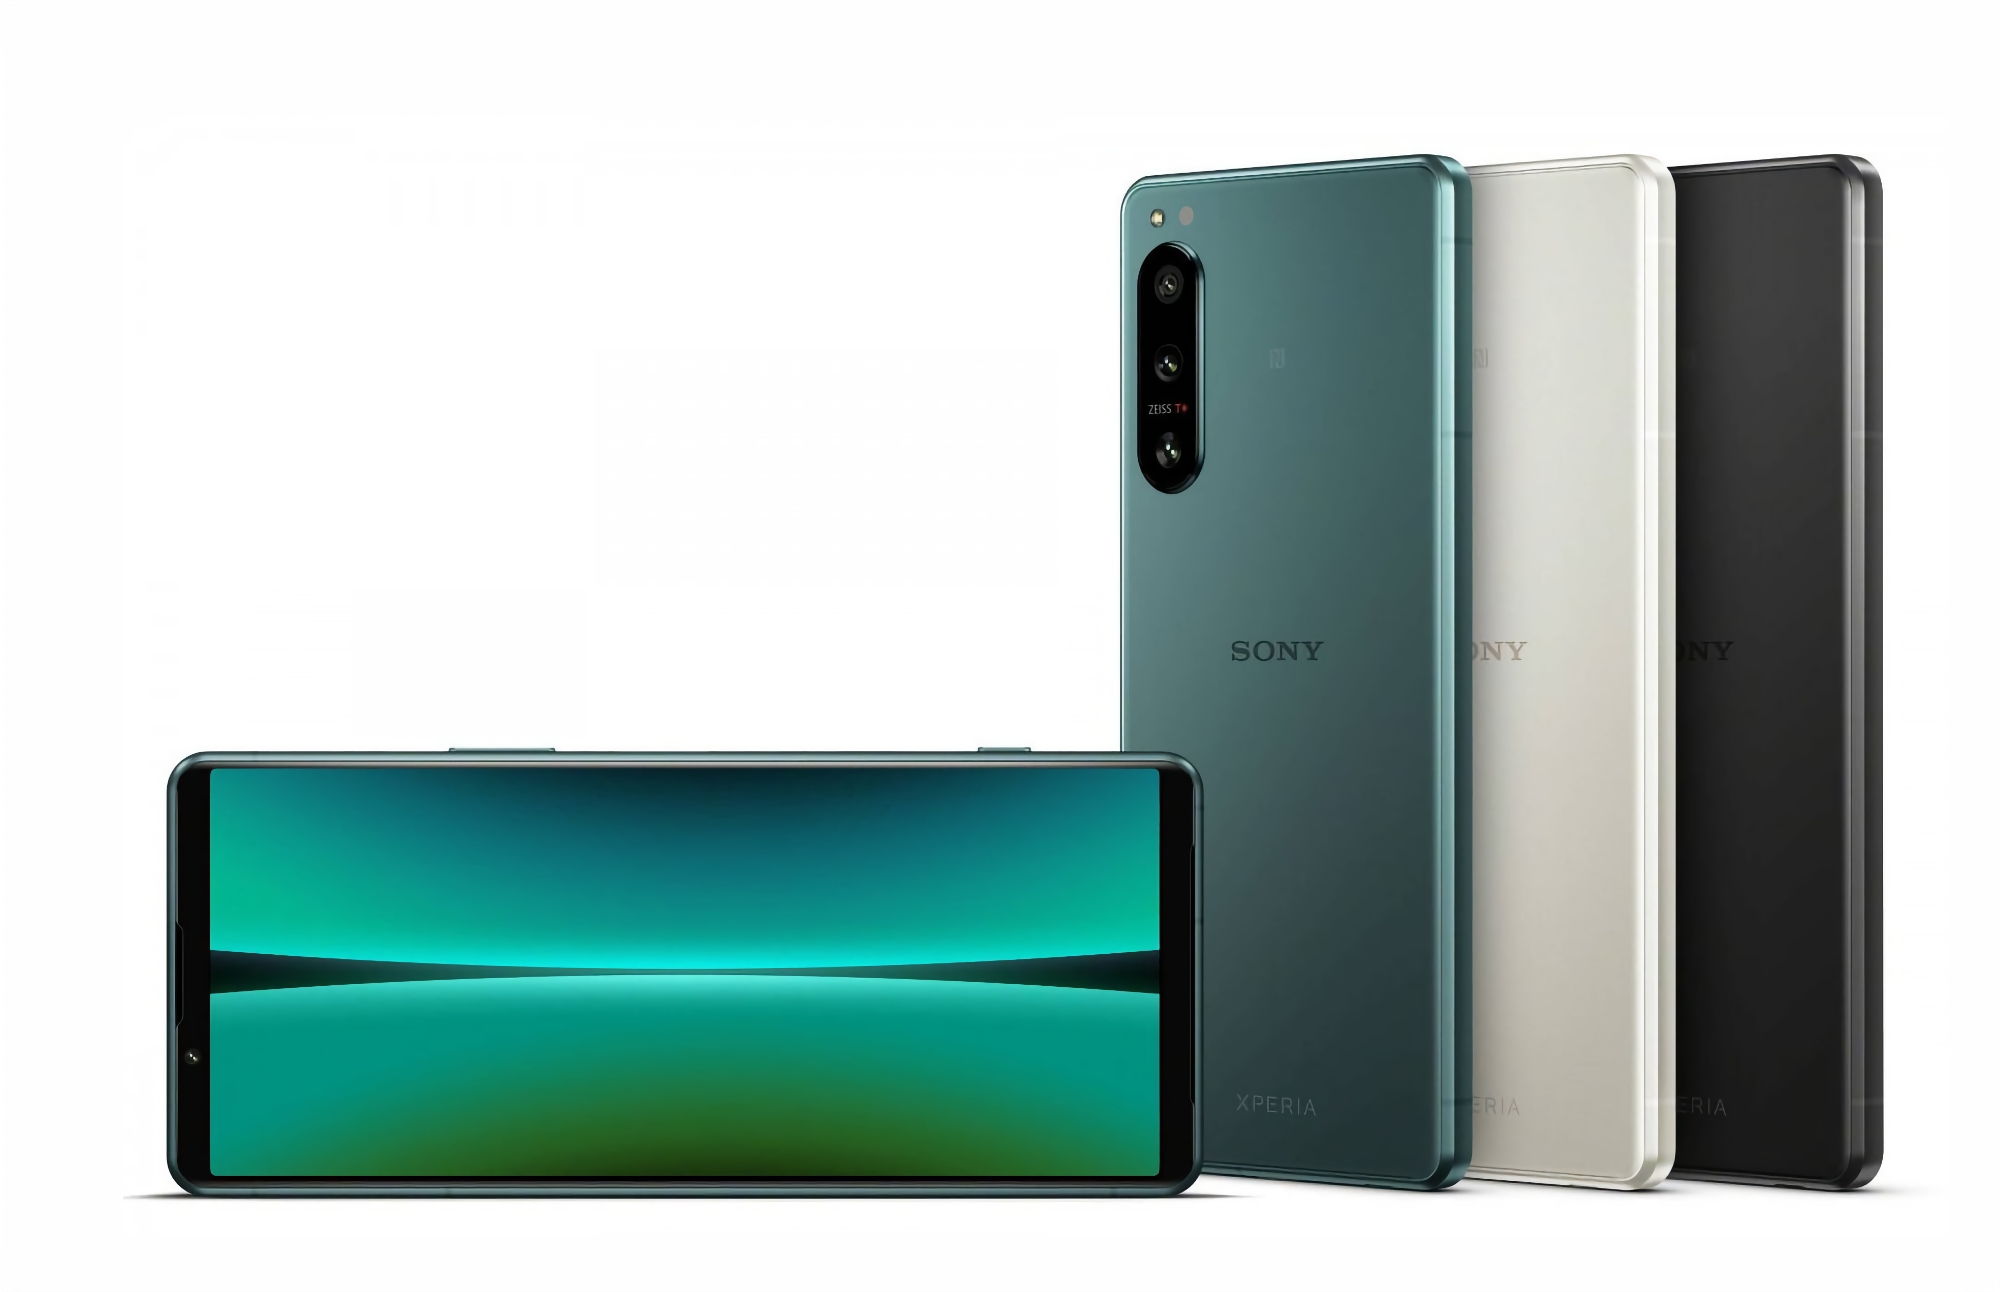 Sony Xperia 5 IV: compact flagship with Snapdragon 8 Gen 1 chip, 5000 mAh battery and triple 12 MP camera for $999